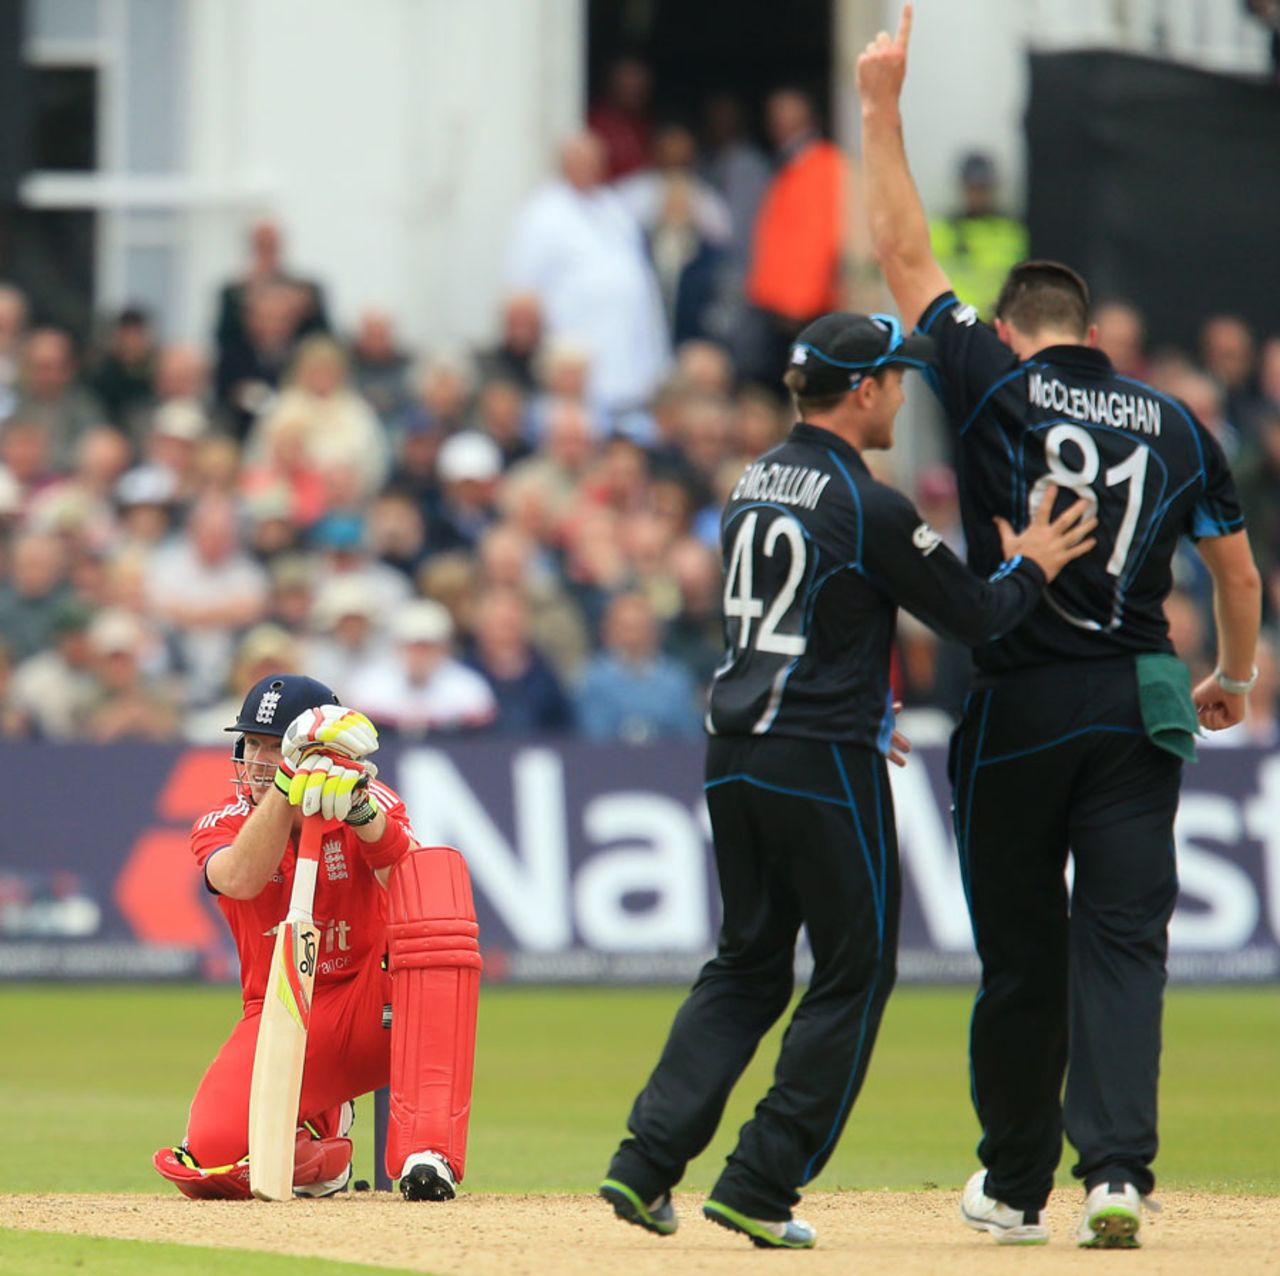 Ian Bell drove Mitchell McClenaghan to mid-off for 82, England v New Zealand, 2nd ODI, Trent Bridge, June 5, 2013